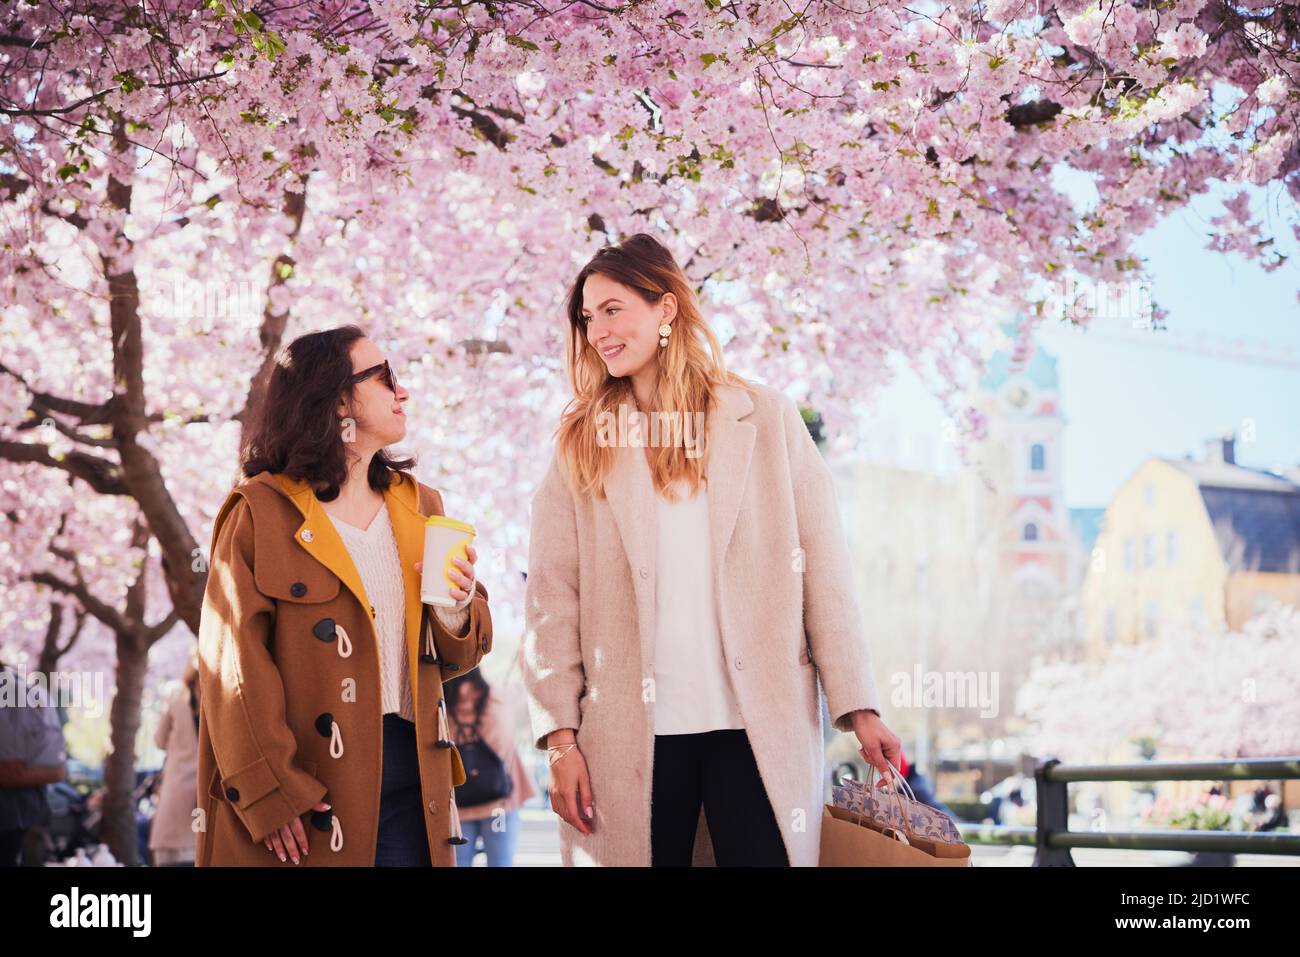 Smiling young women walking under cherry blossom Stock Photo